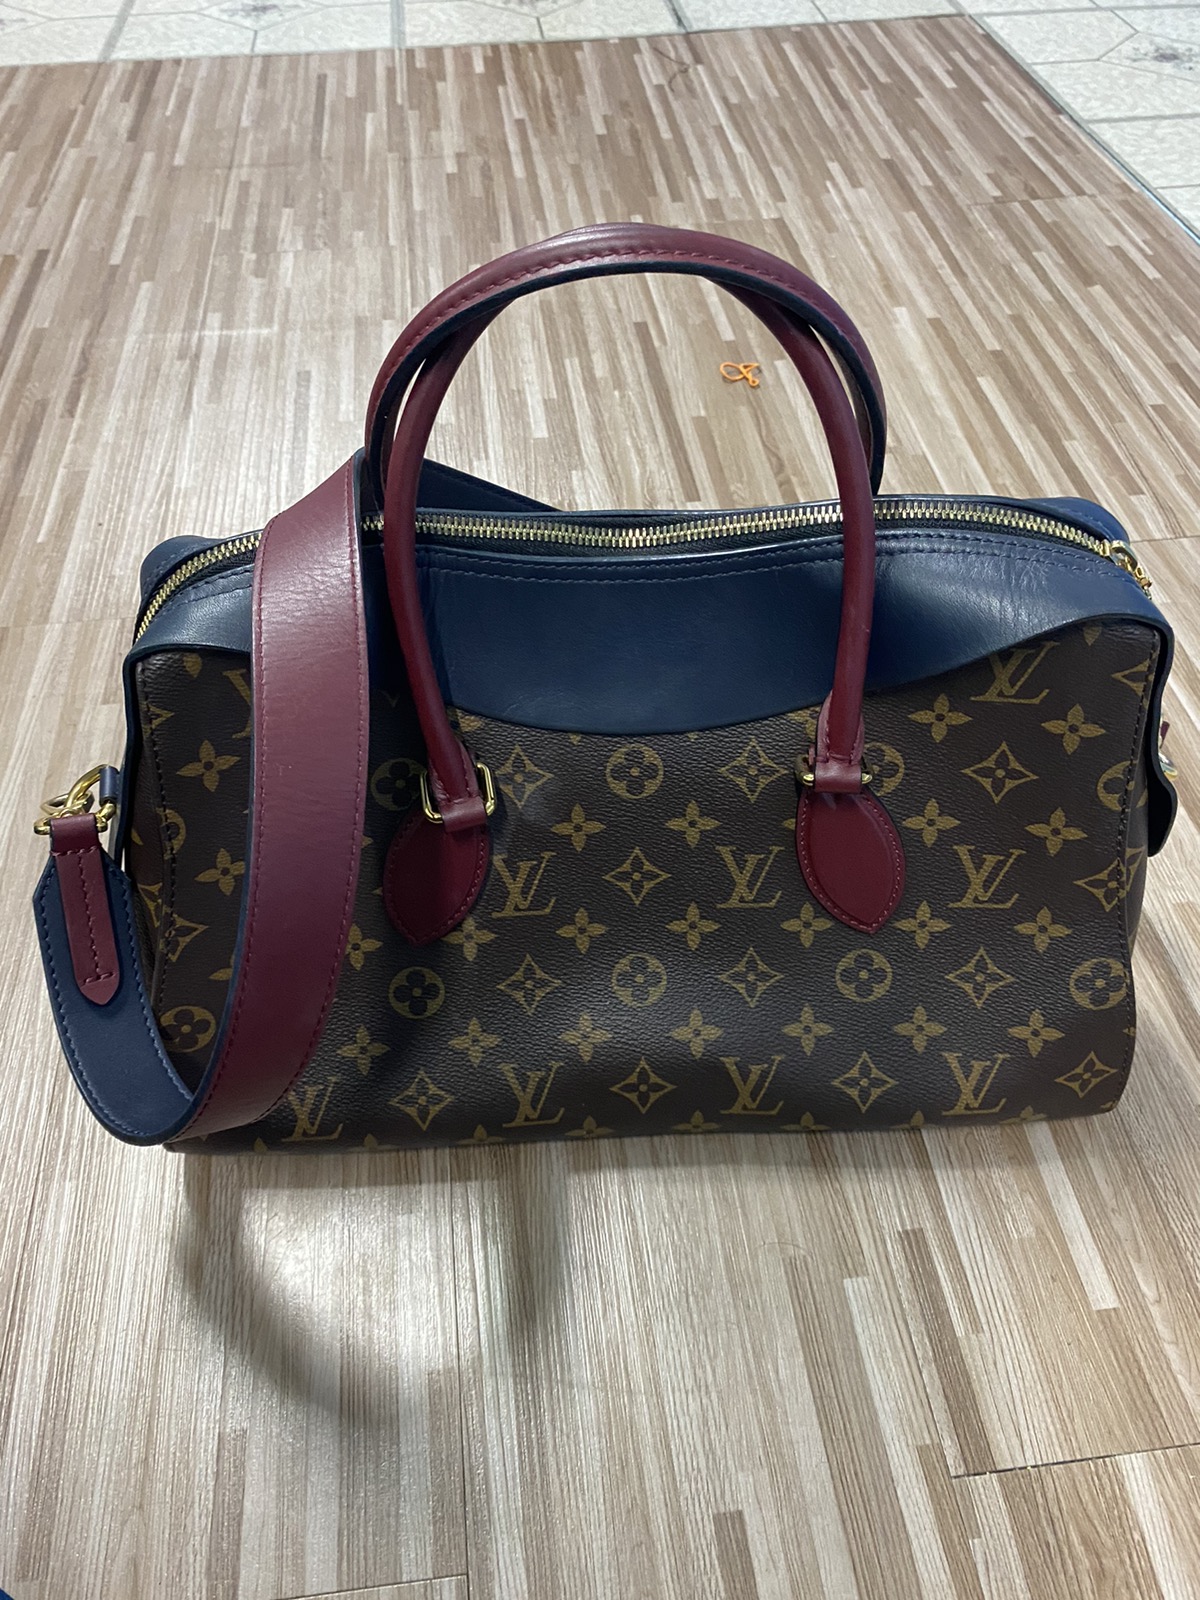 Bag and Purse Organizer with Basic Style for Louis Vuitton Tournelle